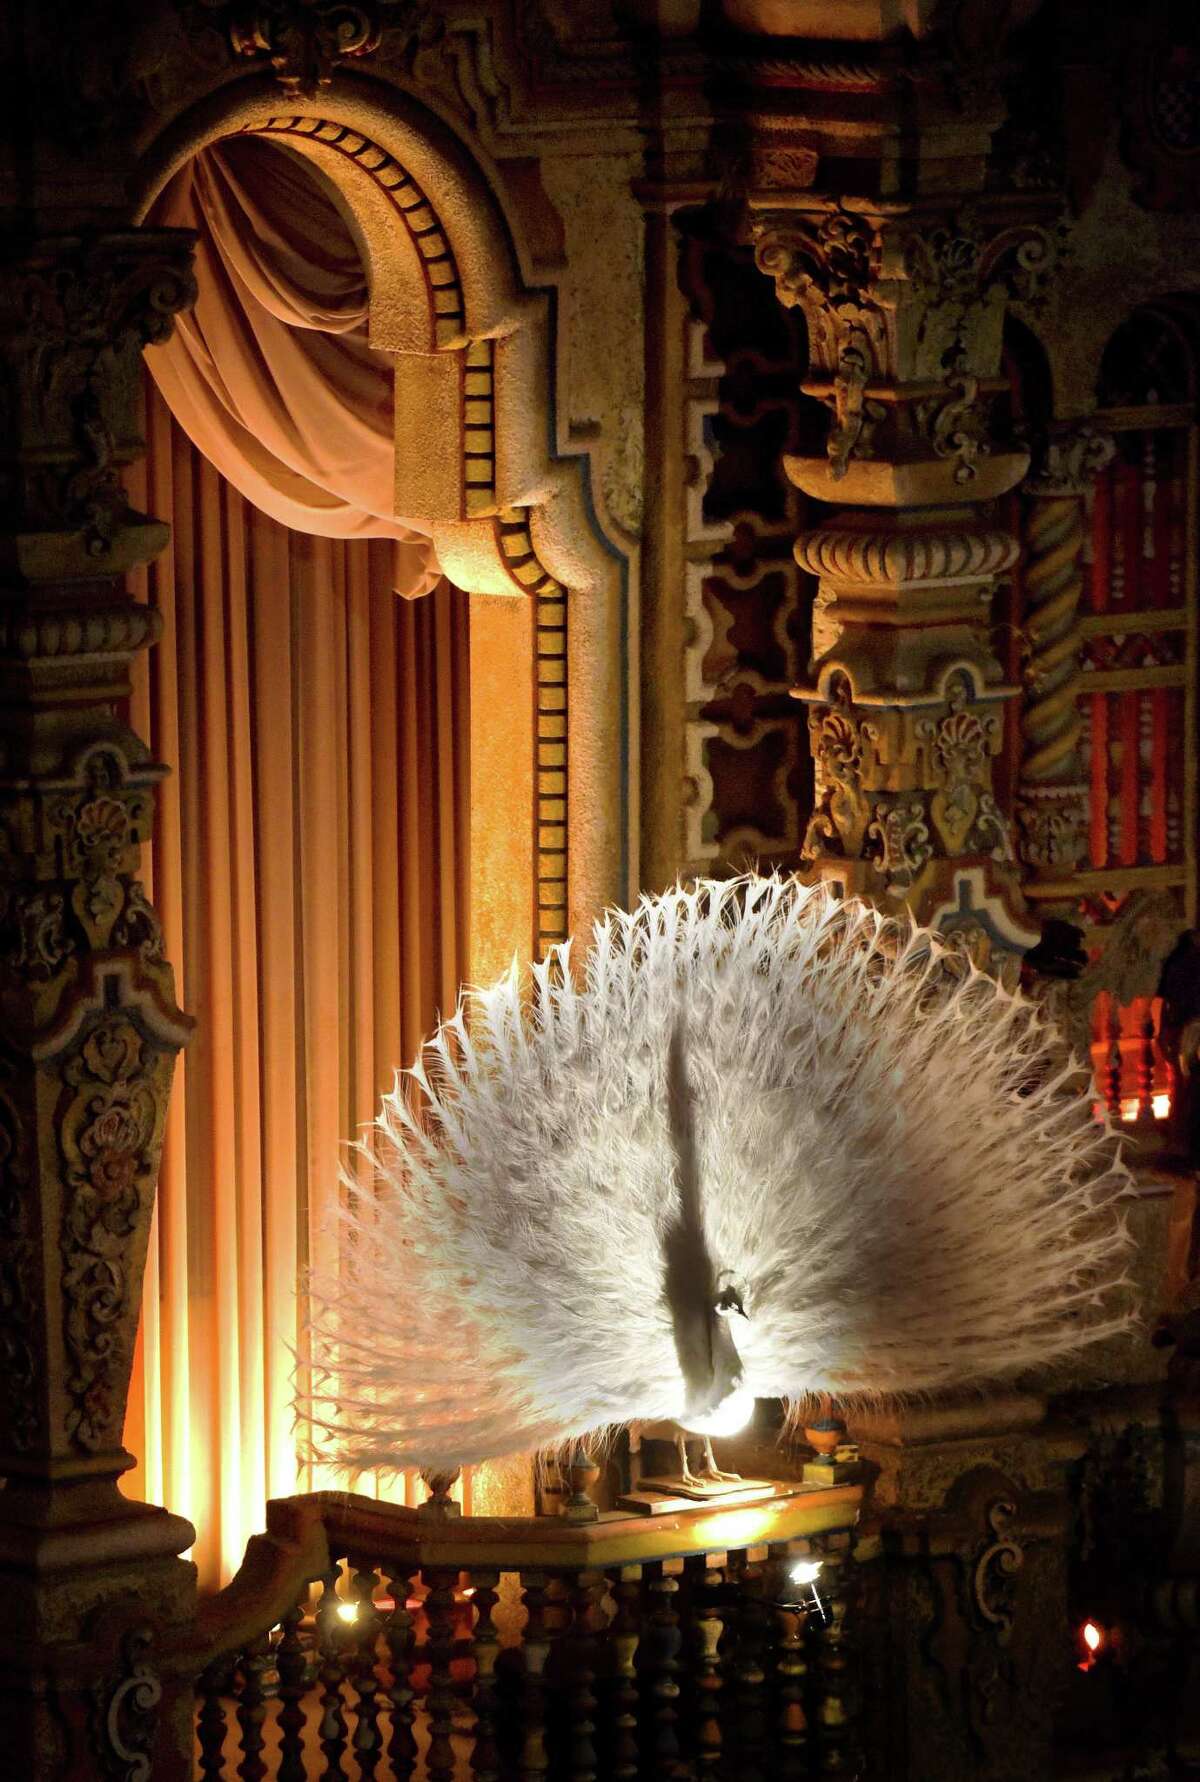 The Majestic Theatre’s white peacock draws the eye partly because of the way that it is lit.